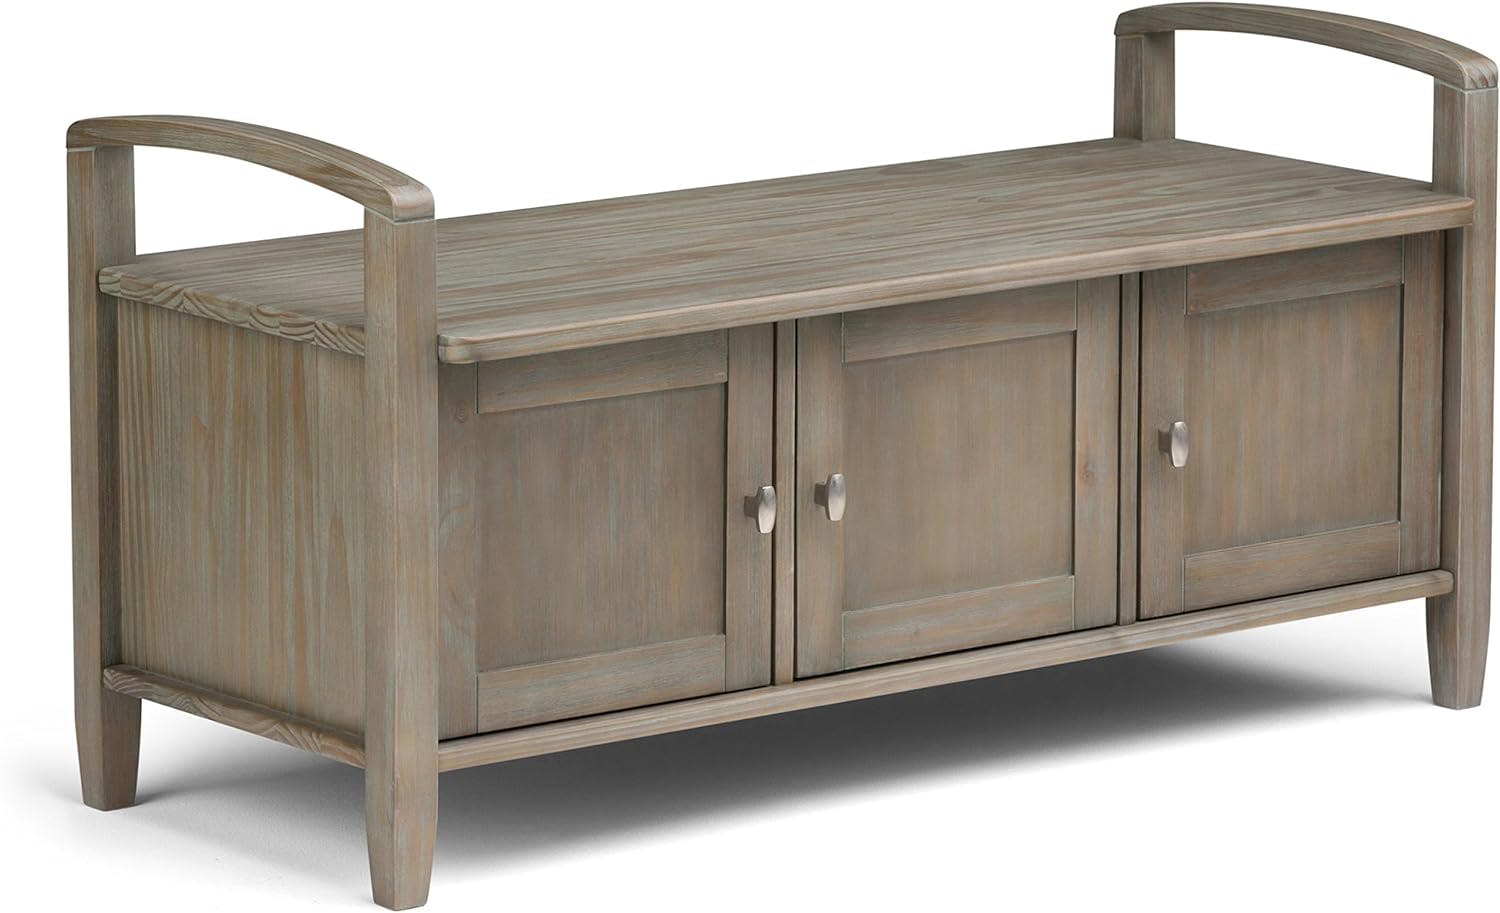 Rustic Distressed Gray 44" Solid Hardwood Storage Bench with Armrests